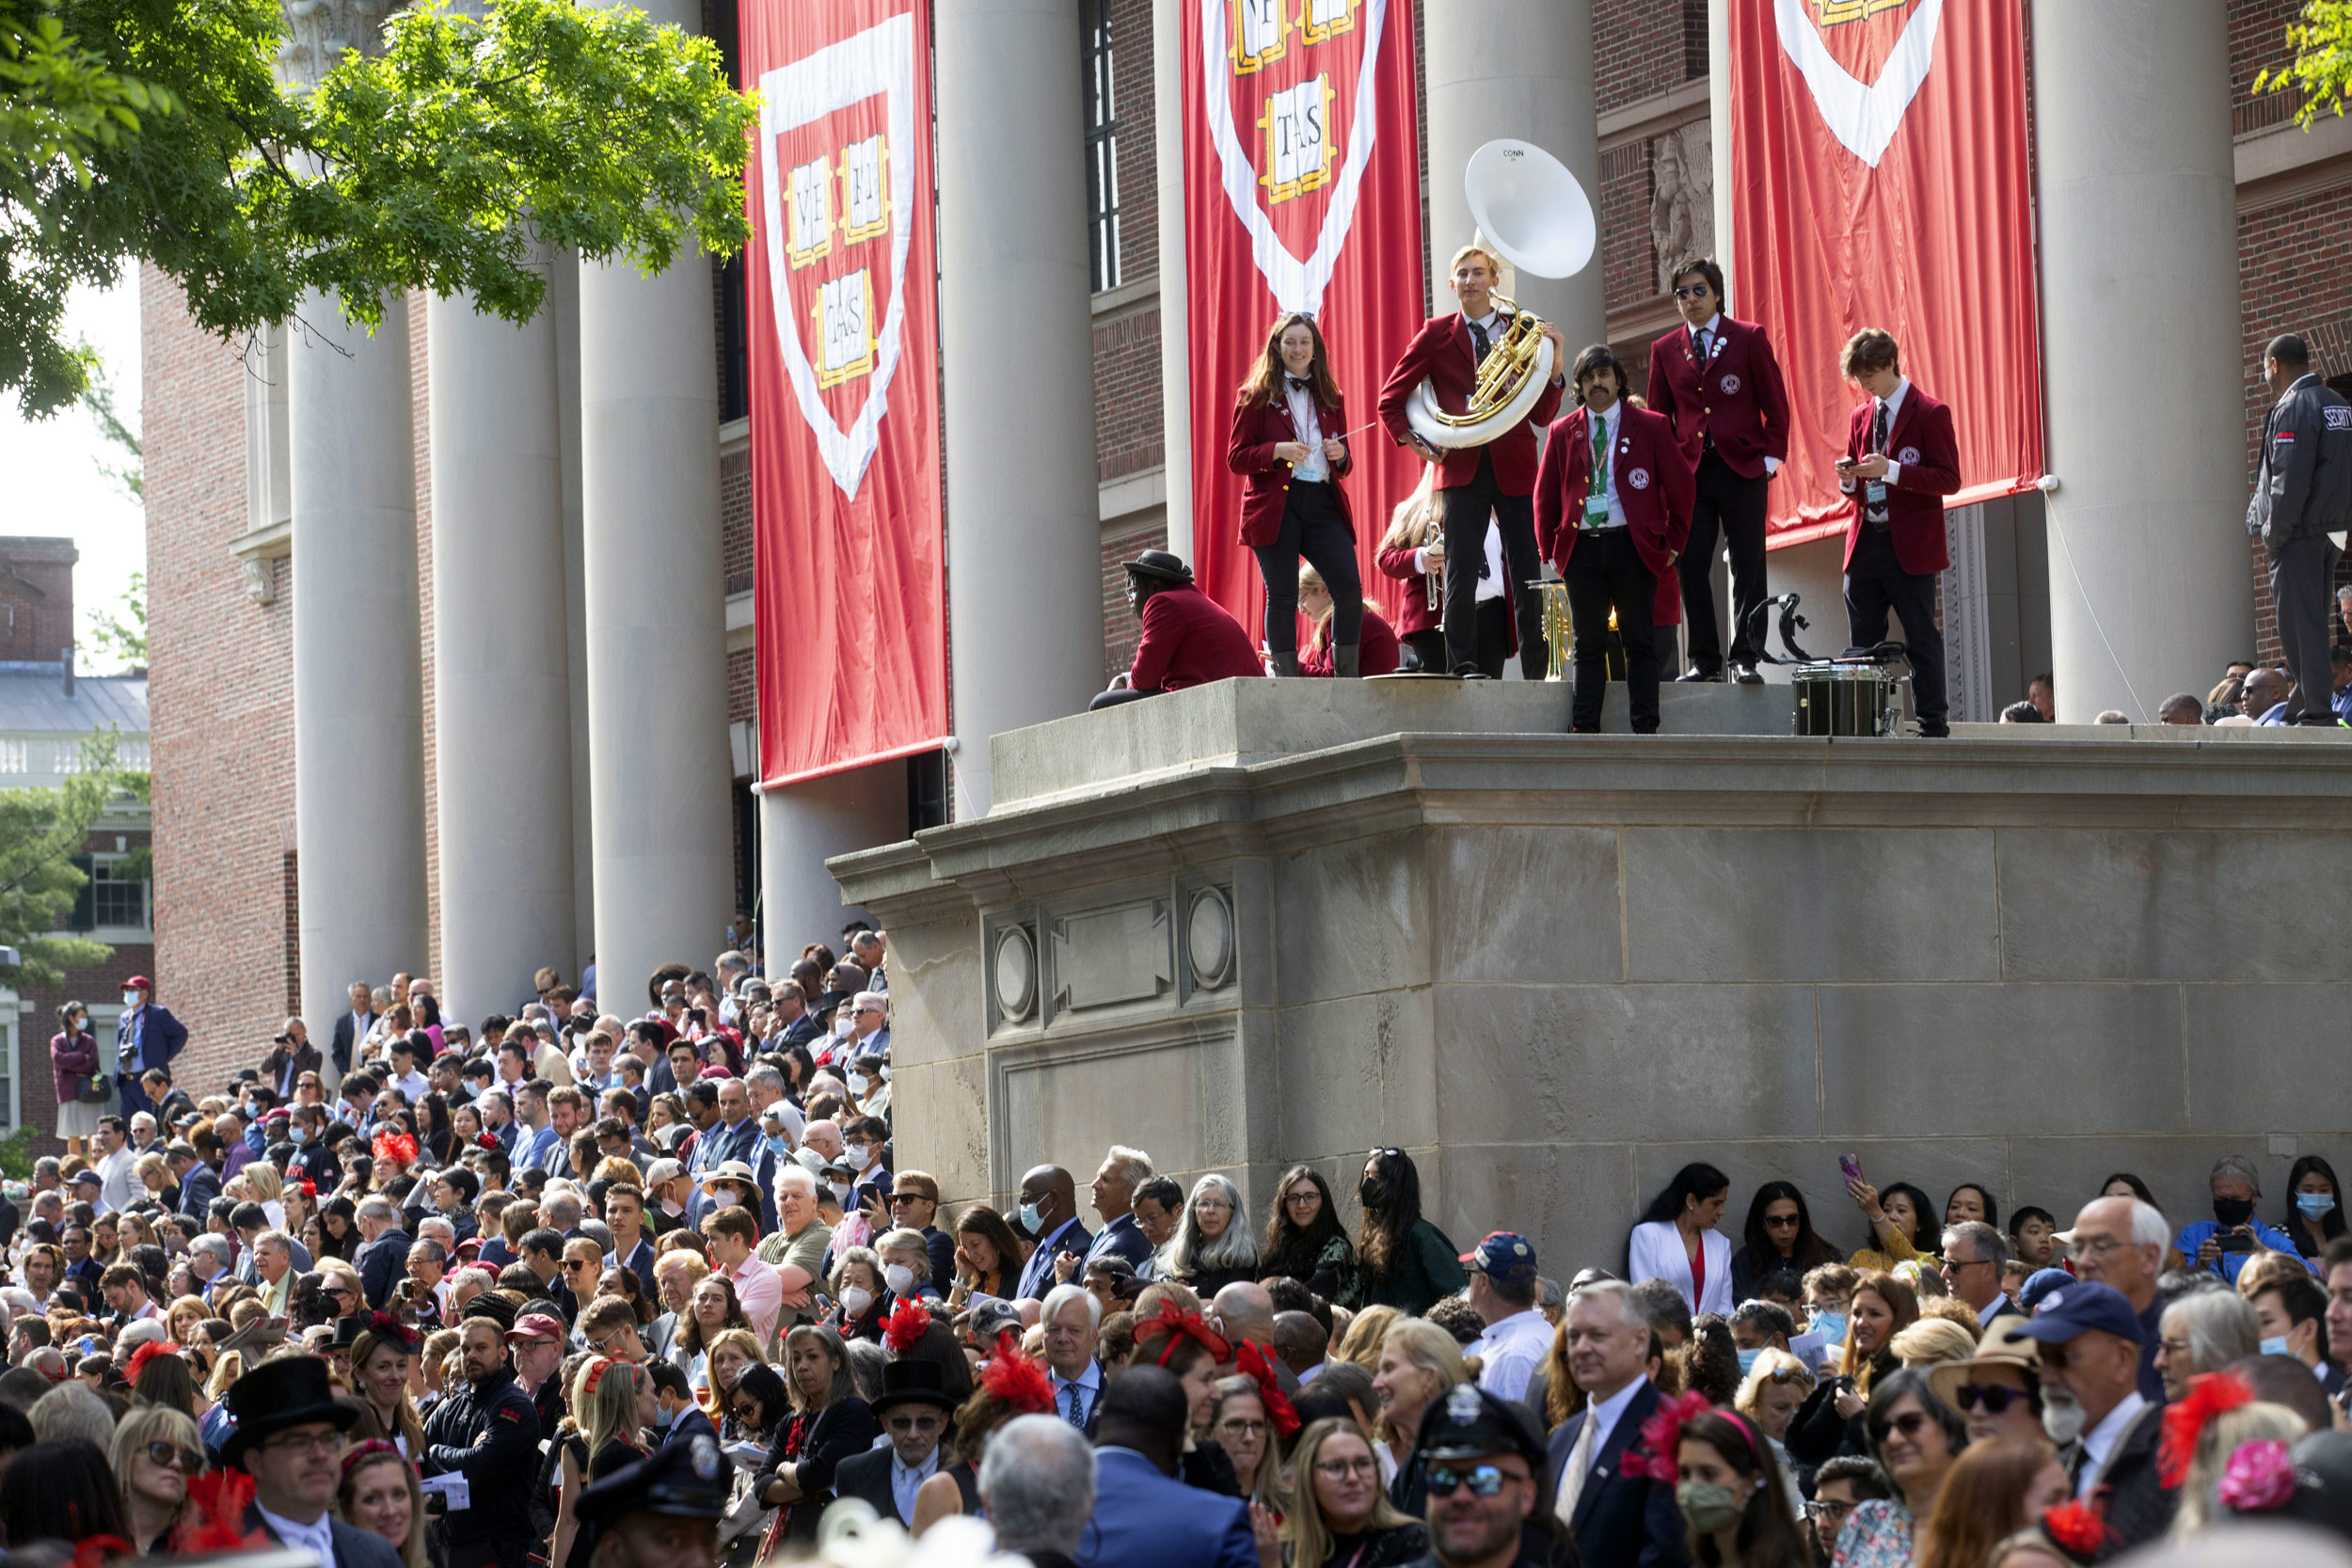 The Harvard Band gathers at Widener Library with a sea of family members below.